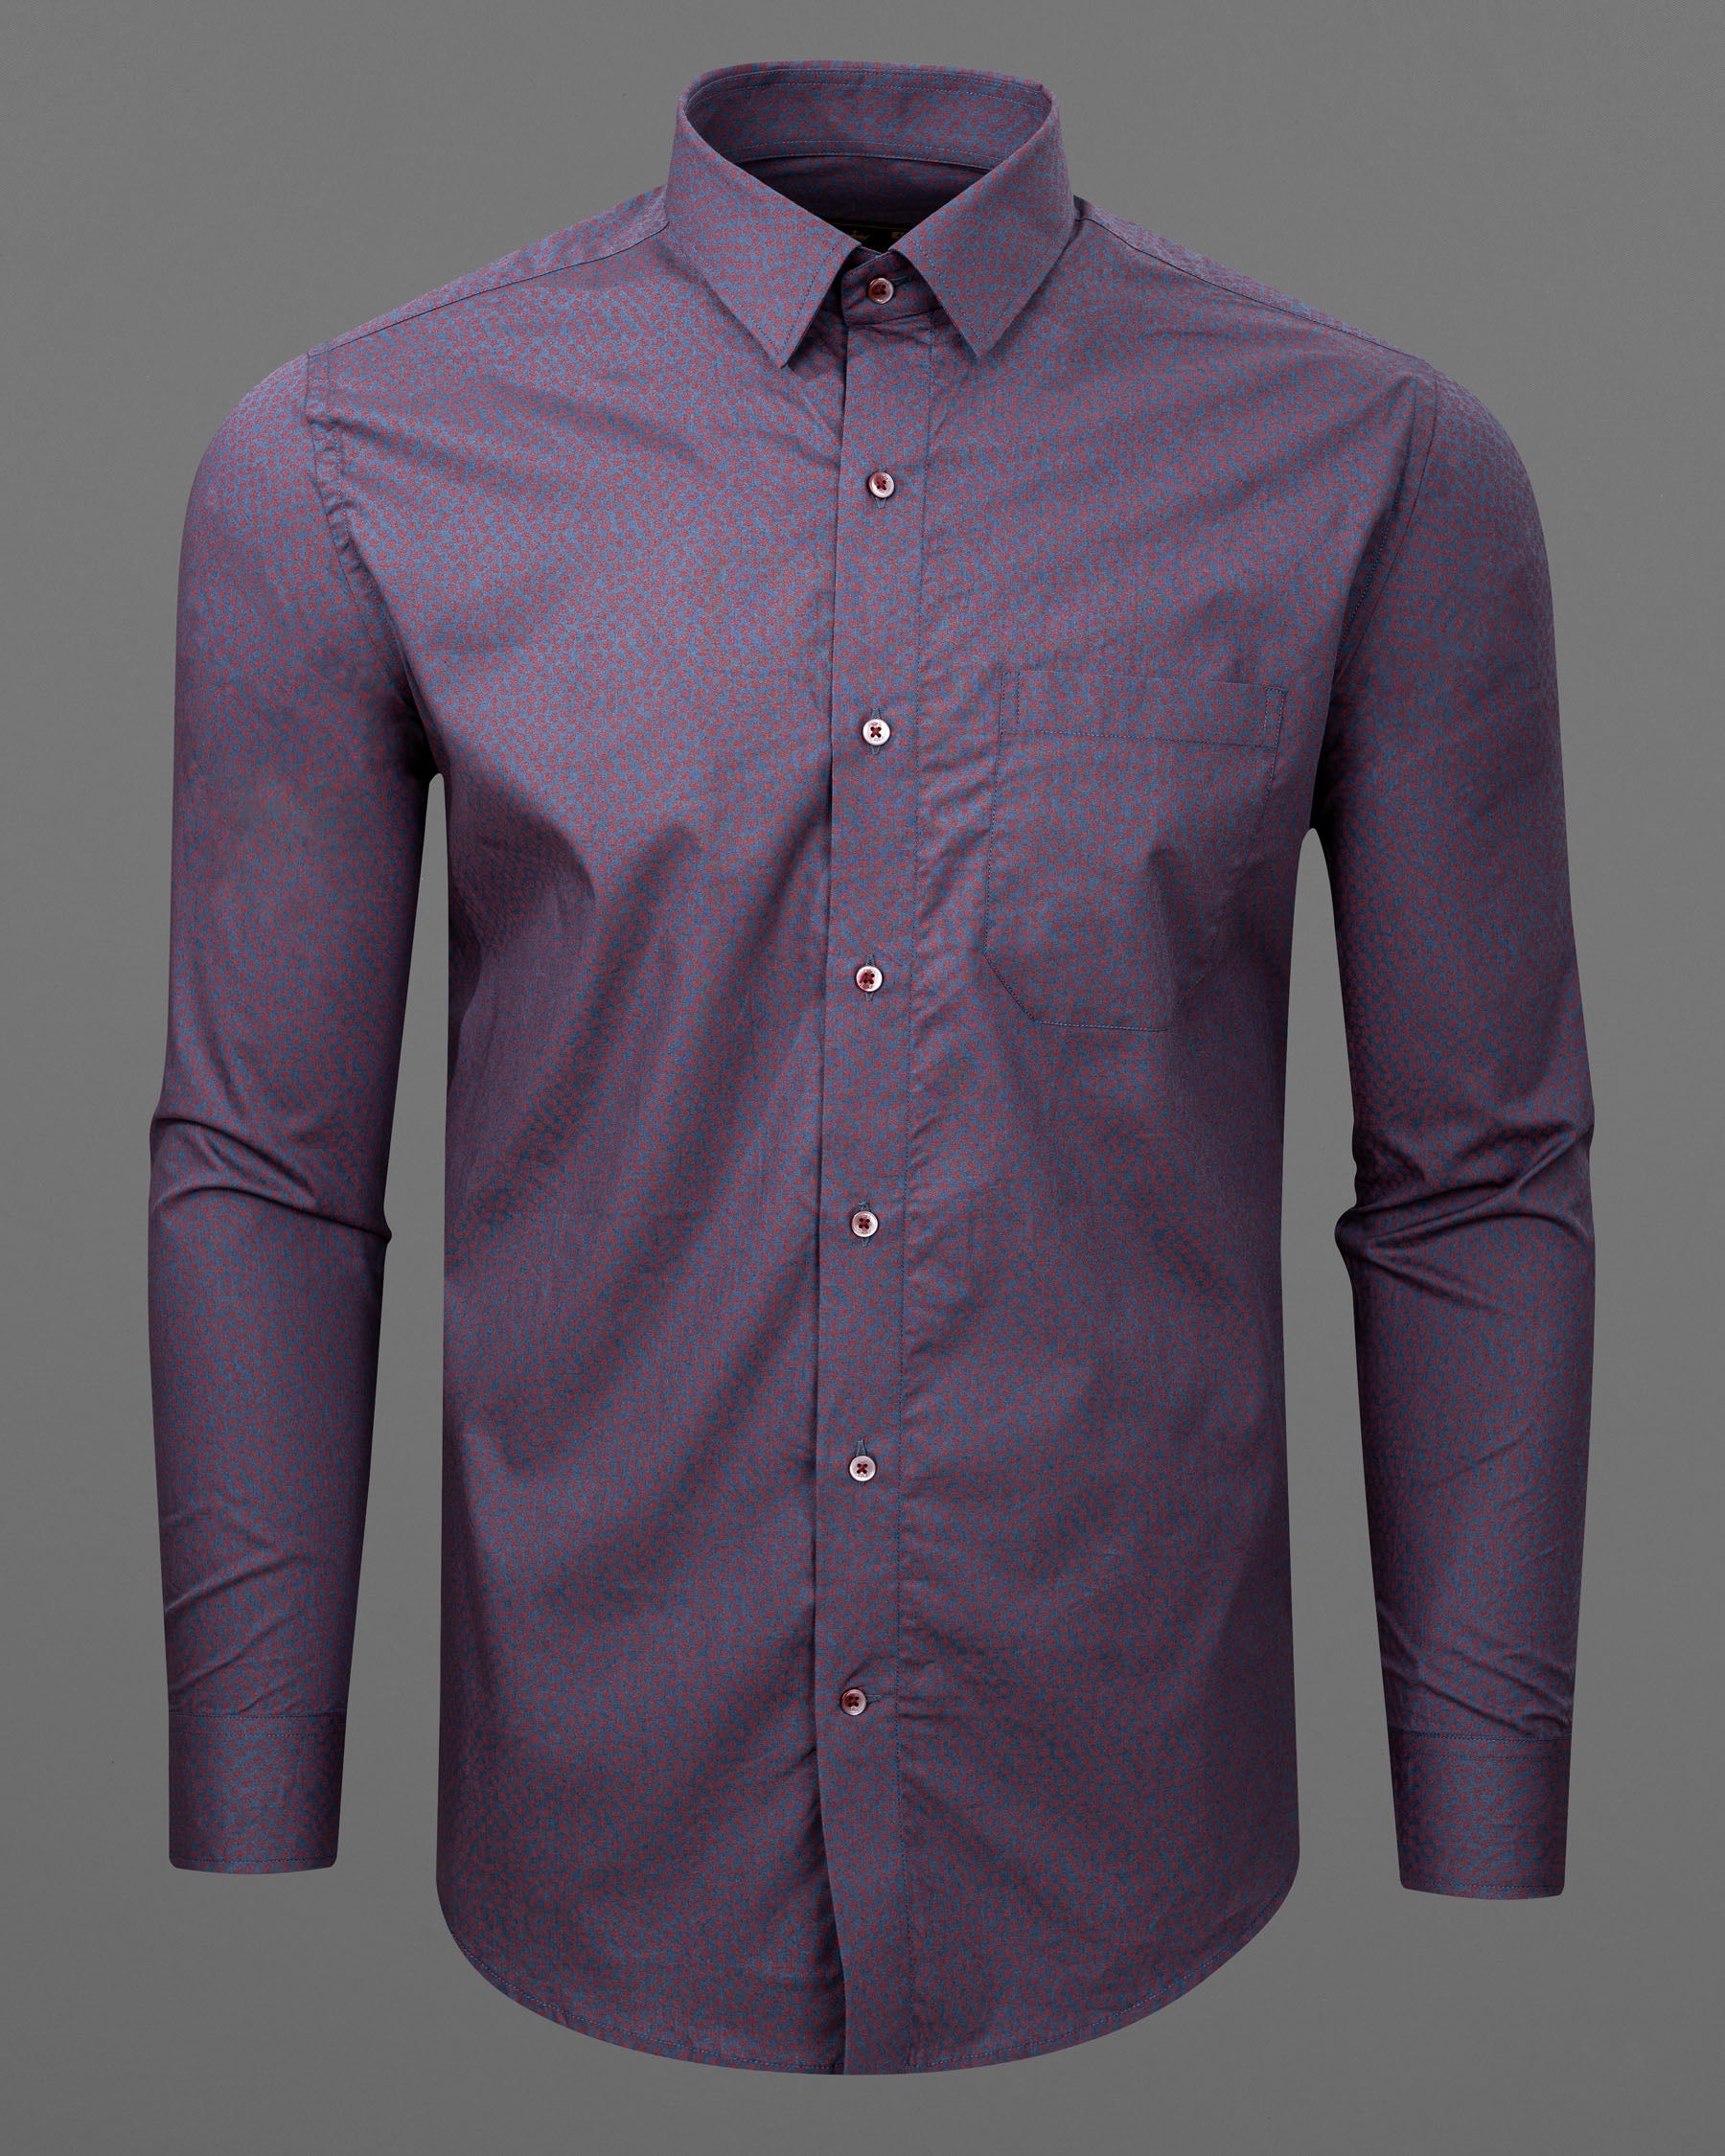 Cadet with Cadillac Two Tone Premium Cotton Shirt 6361-MN-38,6361-MN-H-38,6361-MN-39,6361-MN-H-39,6361-MN-40,6361-MN-H-40,6361-MN-42,6361-MN-H-42,6361-MN-44,6361-MN-H-44,6361-MN-46,6361-MN-H-46,6361-MN-48,6361-MN-H-48,6361-MN-50,6361-MN-H-50,6361-MN-52,6361-MN-H-52